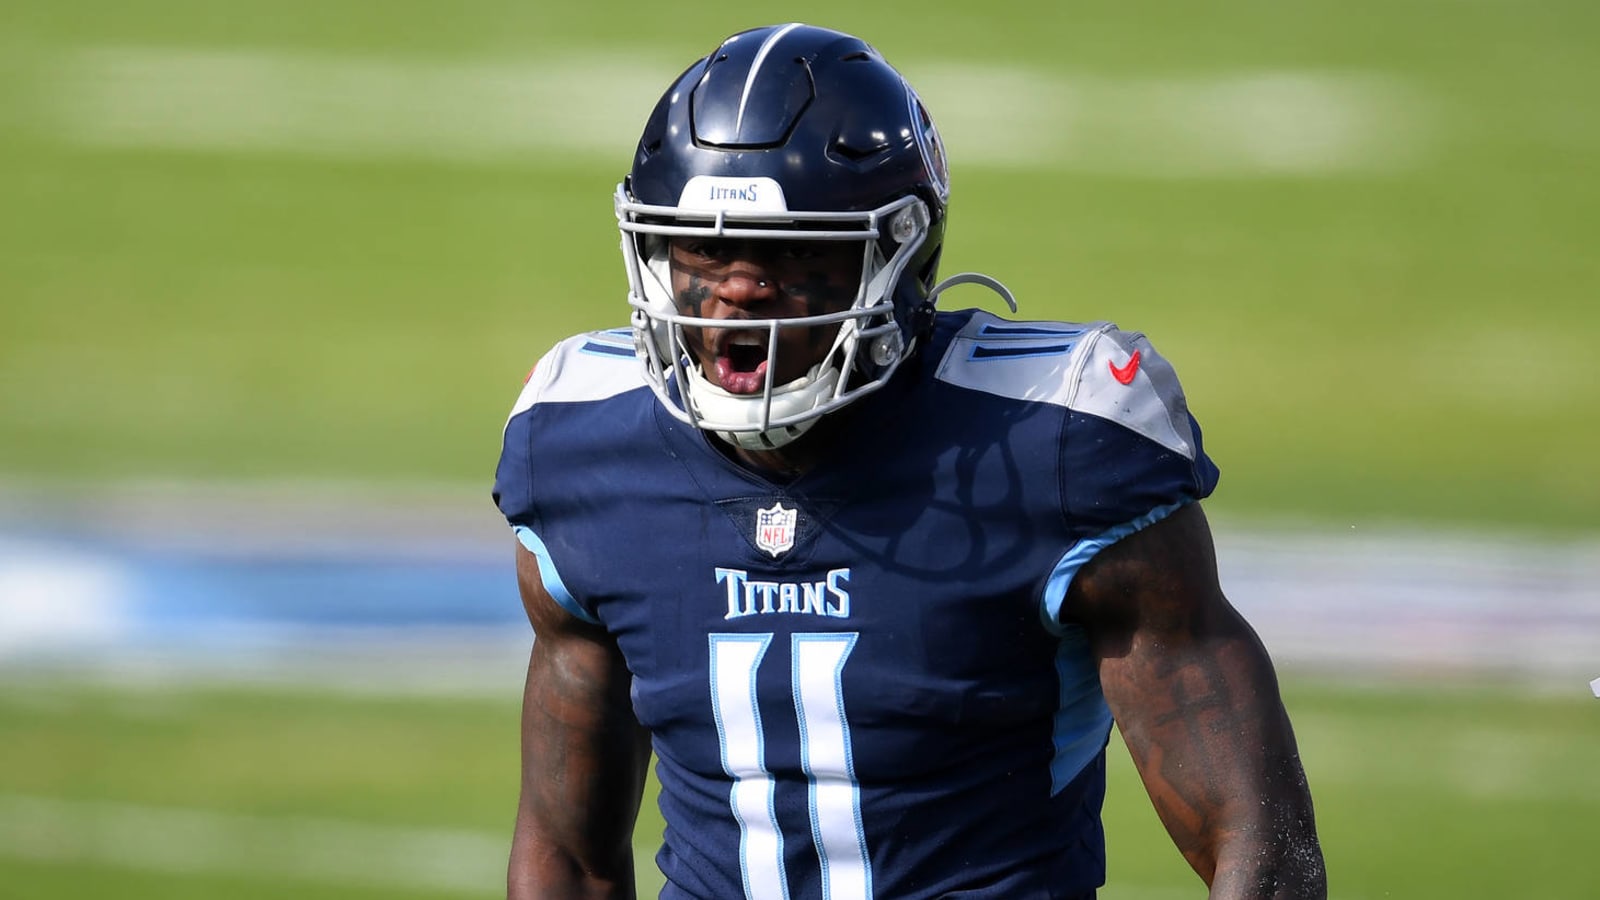 Titans WR A.J. Brown expected to be ready for Week 1 despite knee